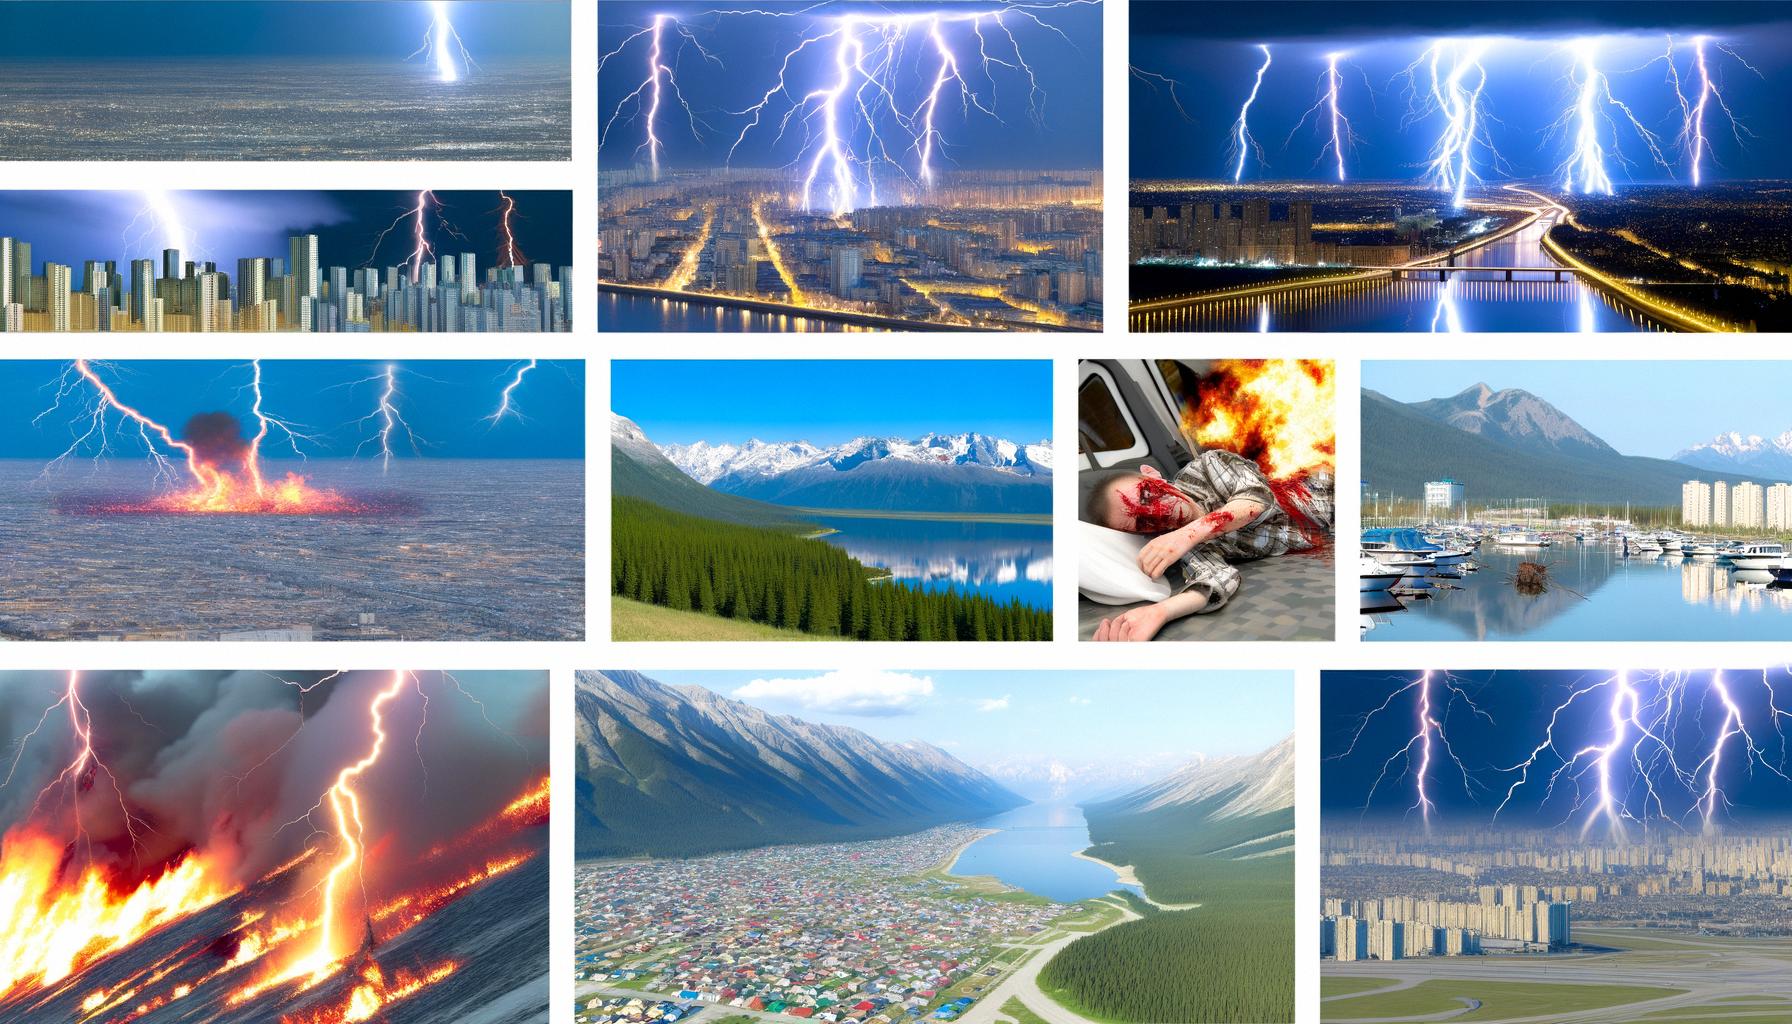 Lightning strikes globally causing multiple fatalities and injuries.